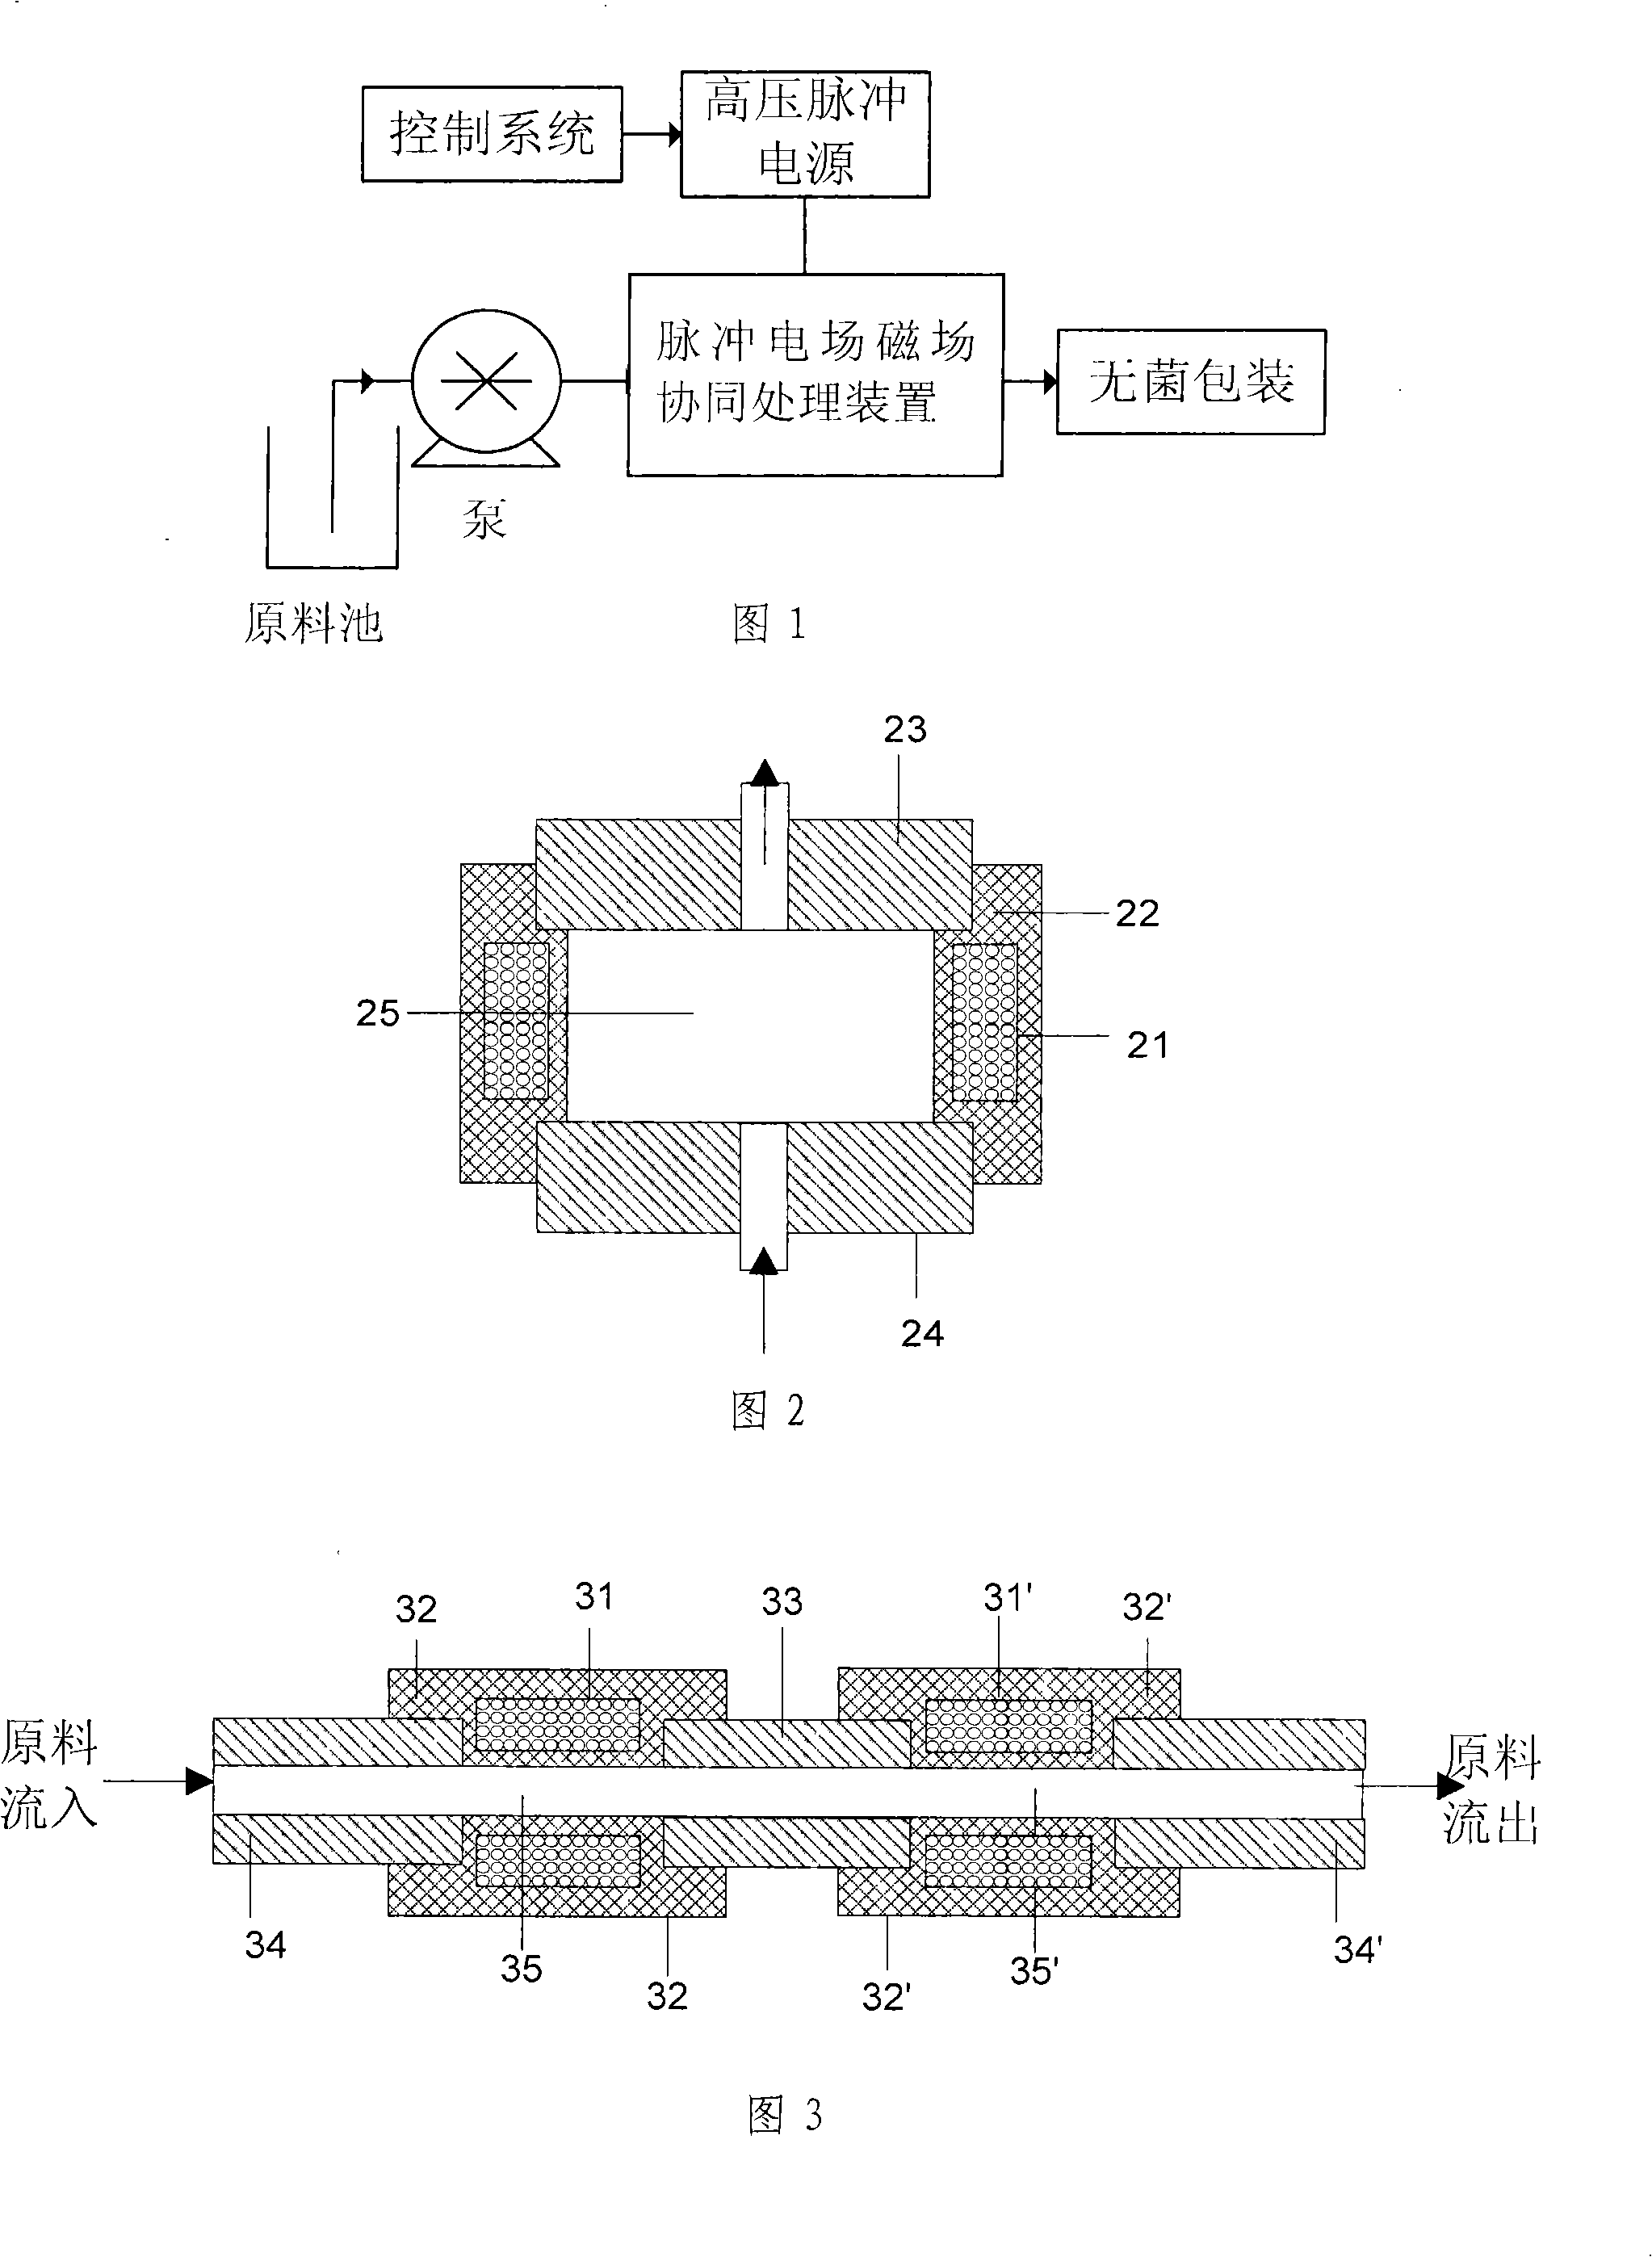 Method and apparatus for materials cooperation disinfection and enzyme dulling with impulse electric field and magnetic field